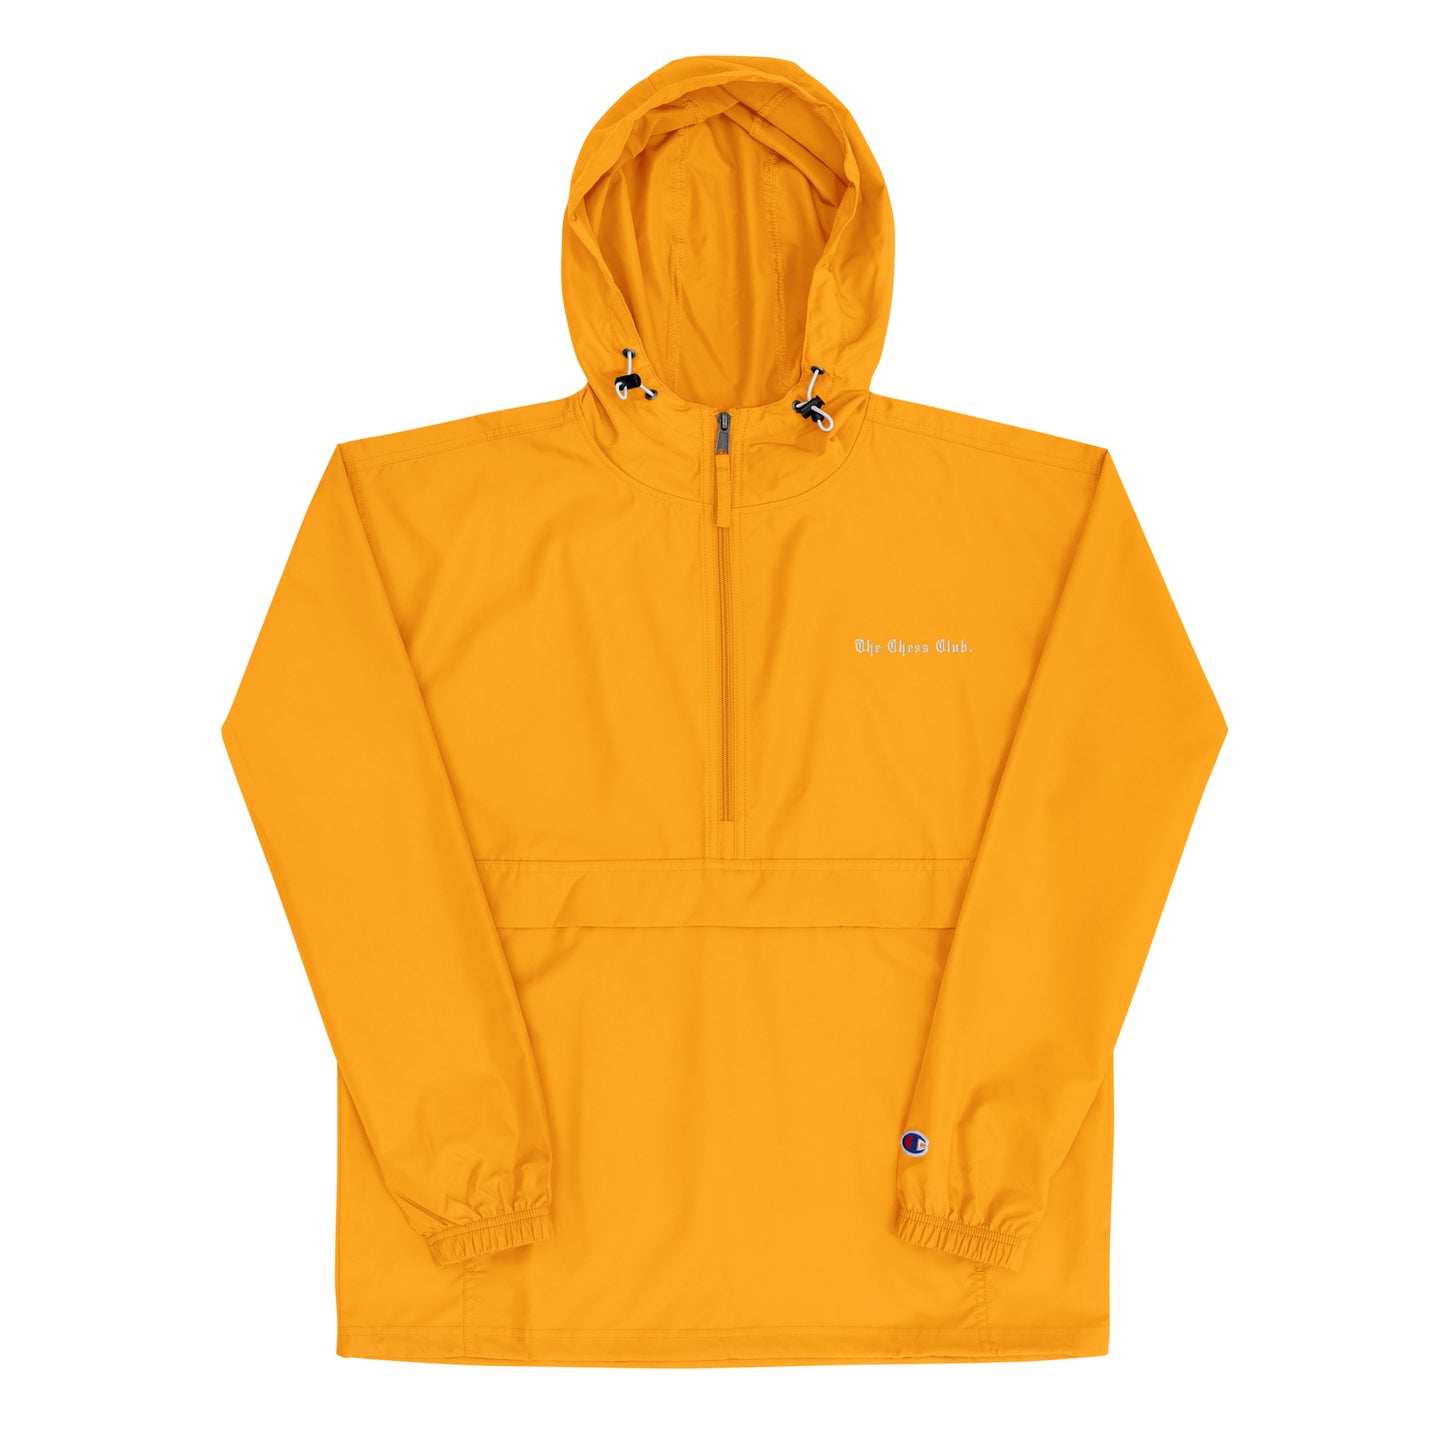 TheChessClub x Champion Packable Jacket